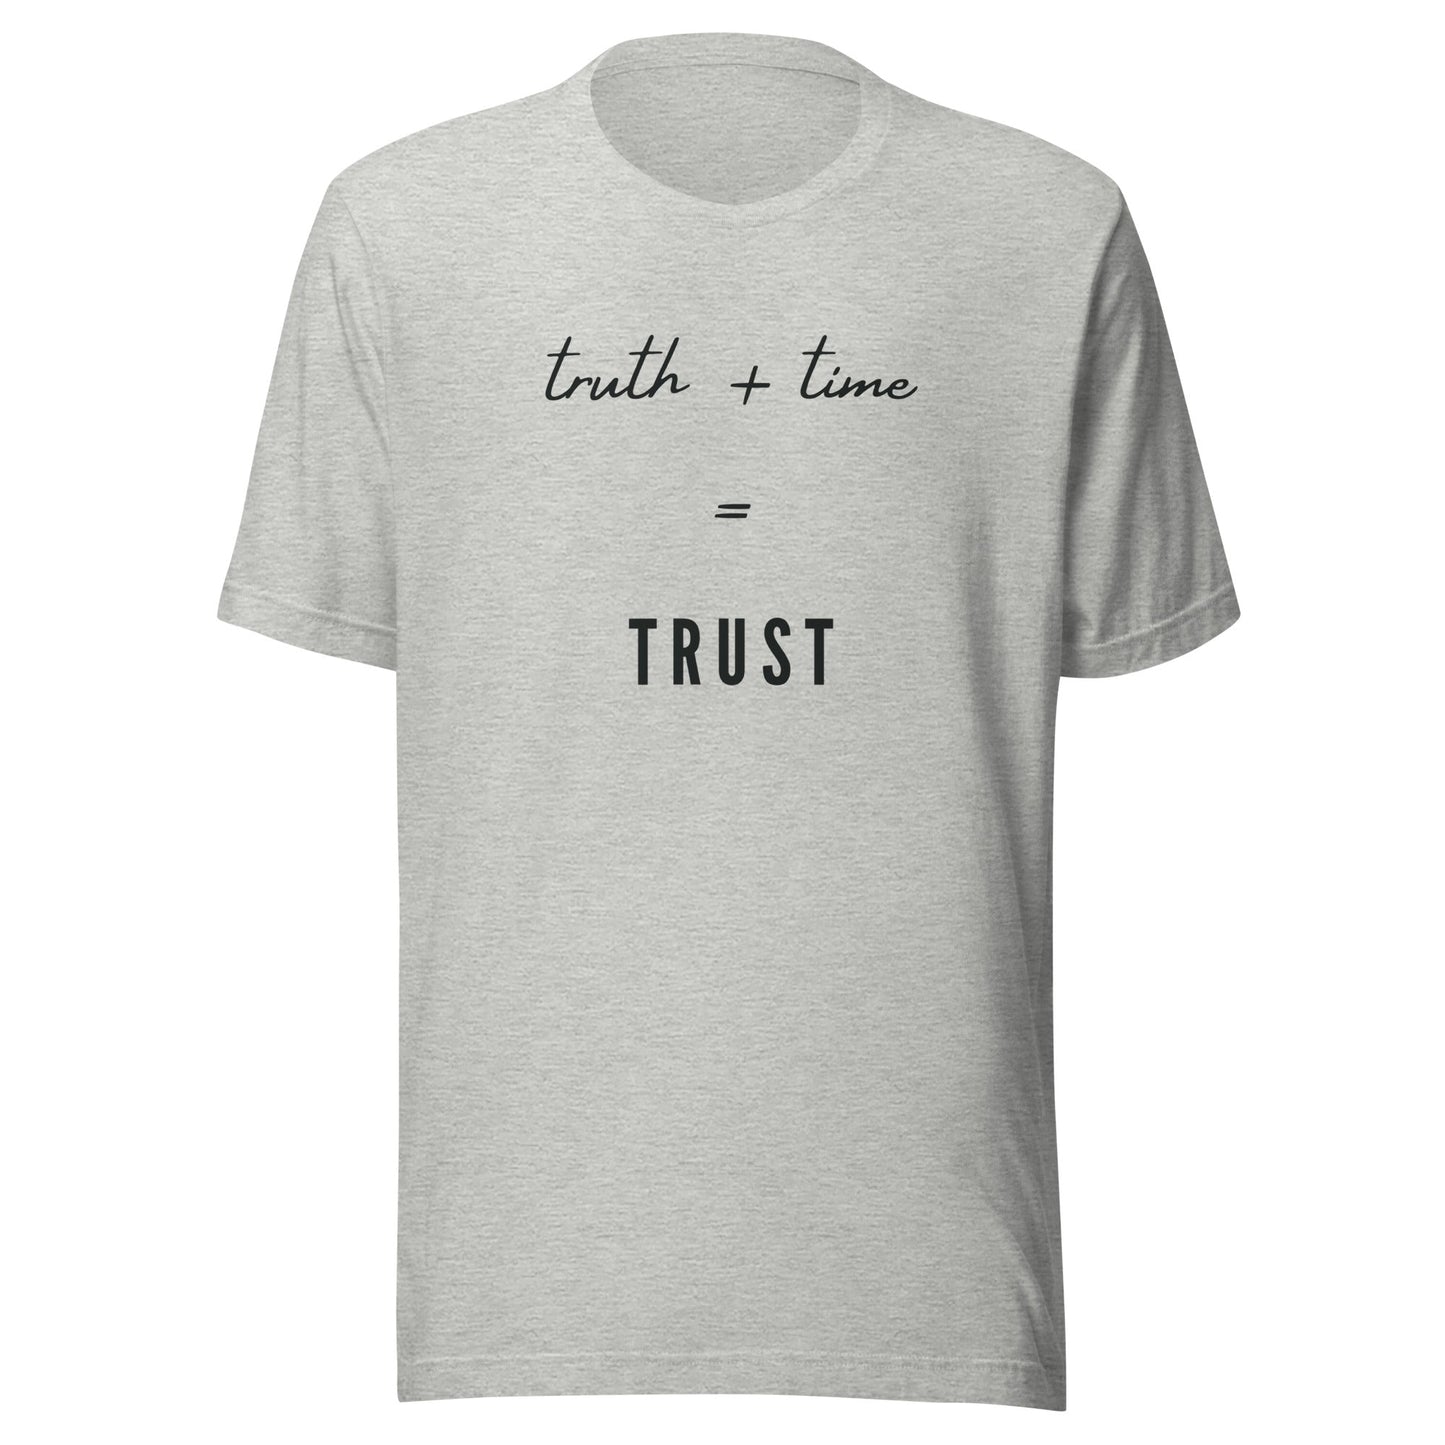 Truth + Time - Unisex t-shirt - lilaloop - T-shirt